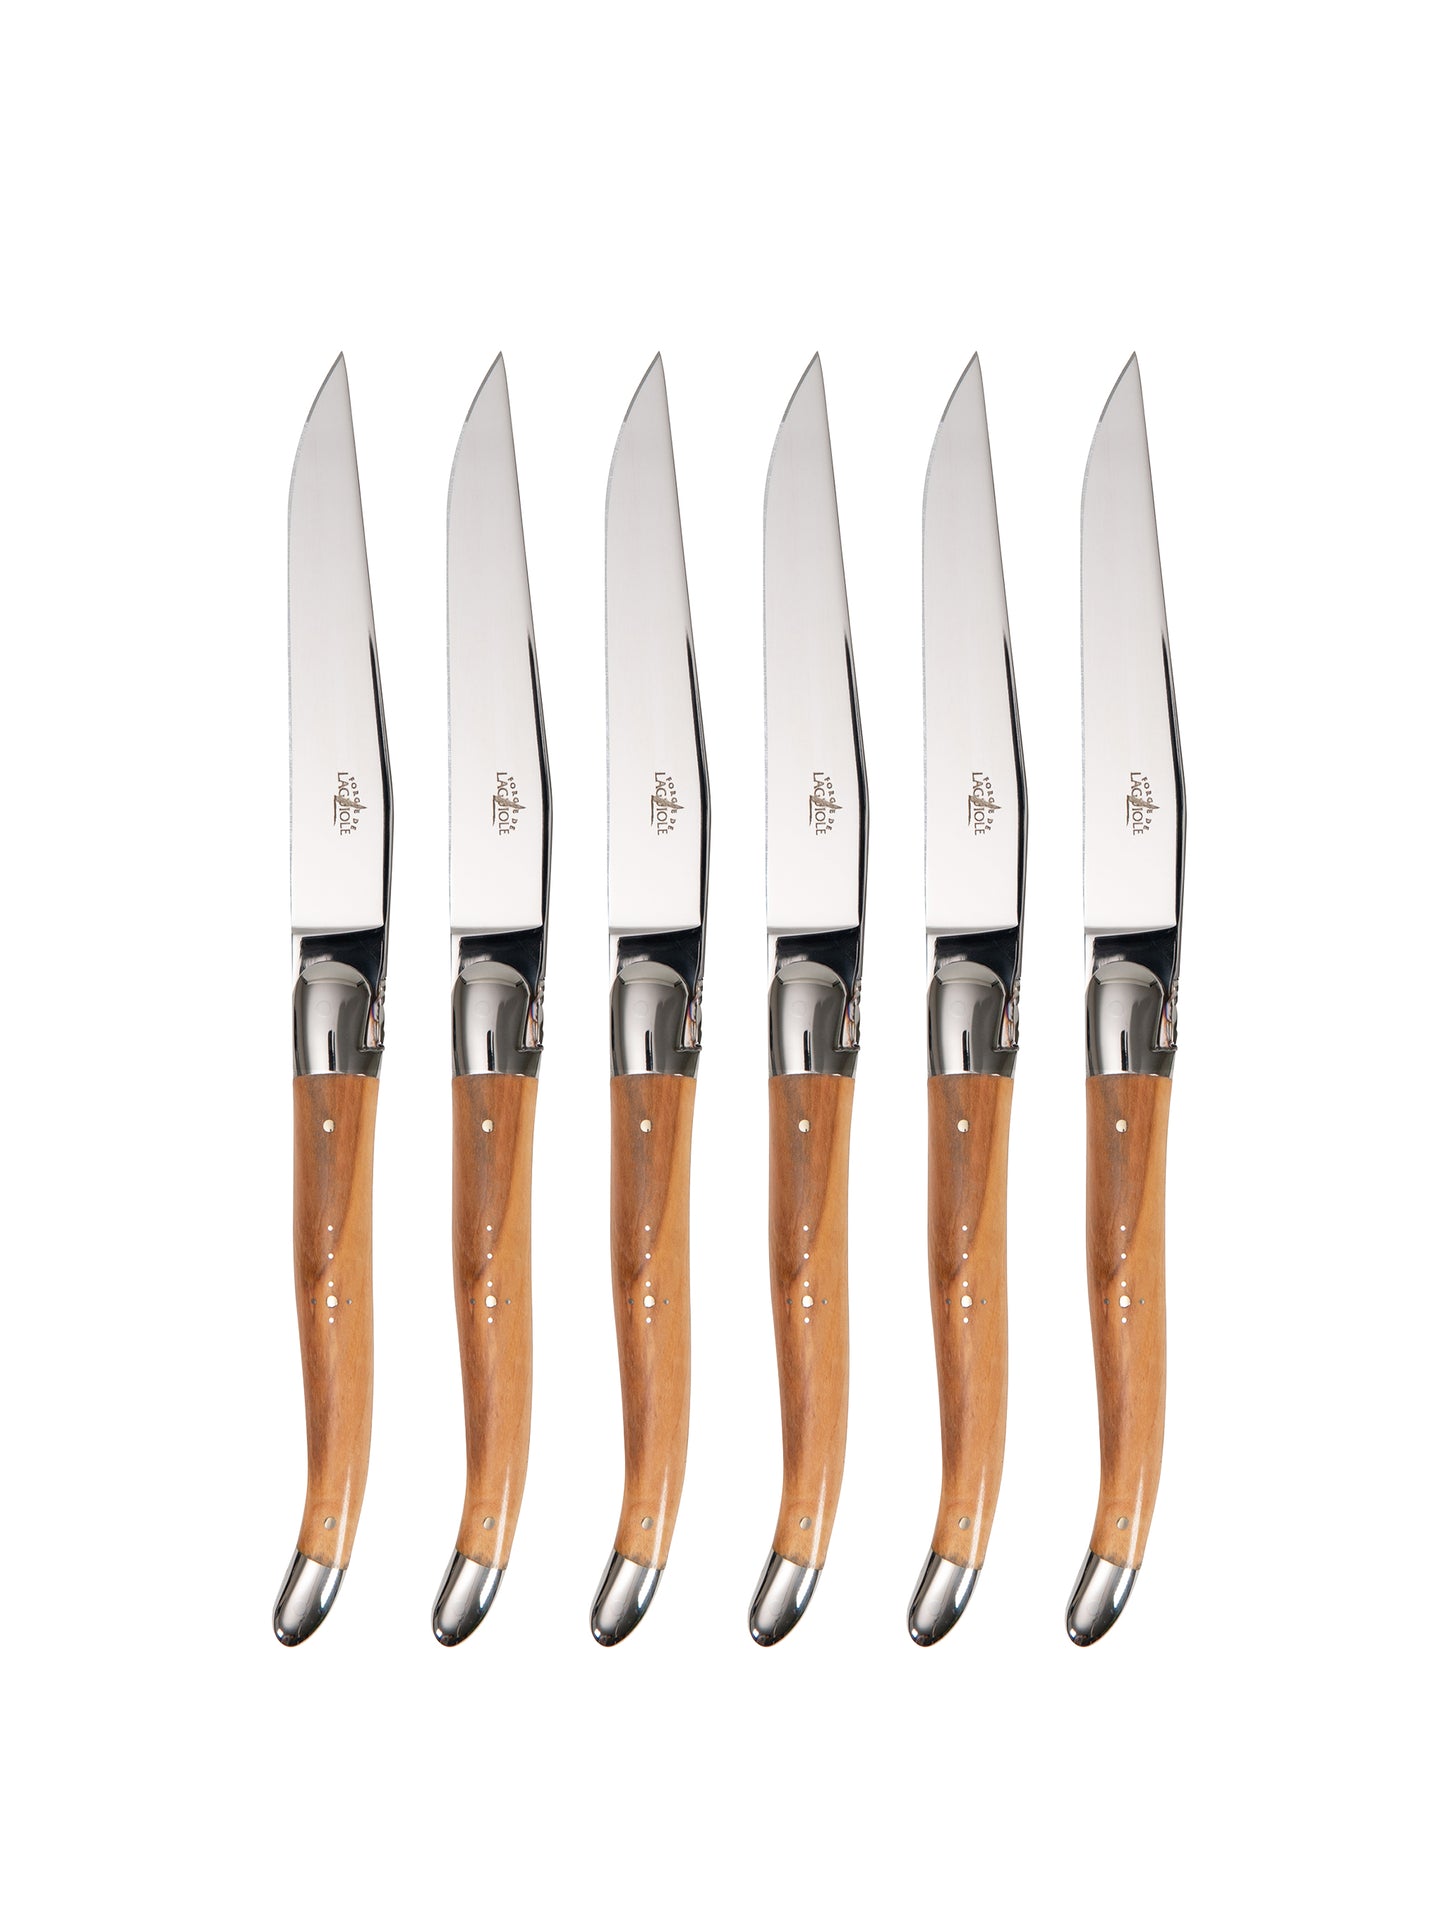 Laguiole Forged Steak Knives Stainless Steel